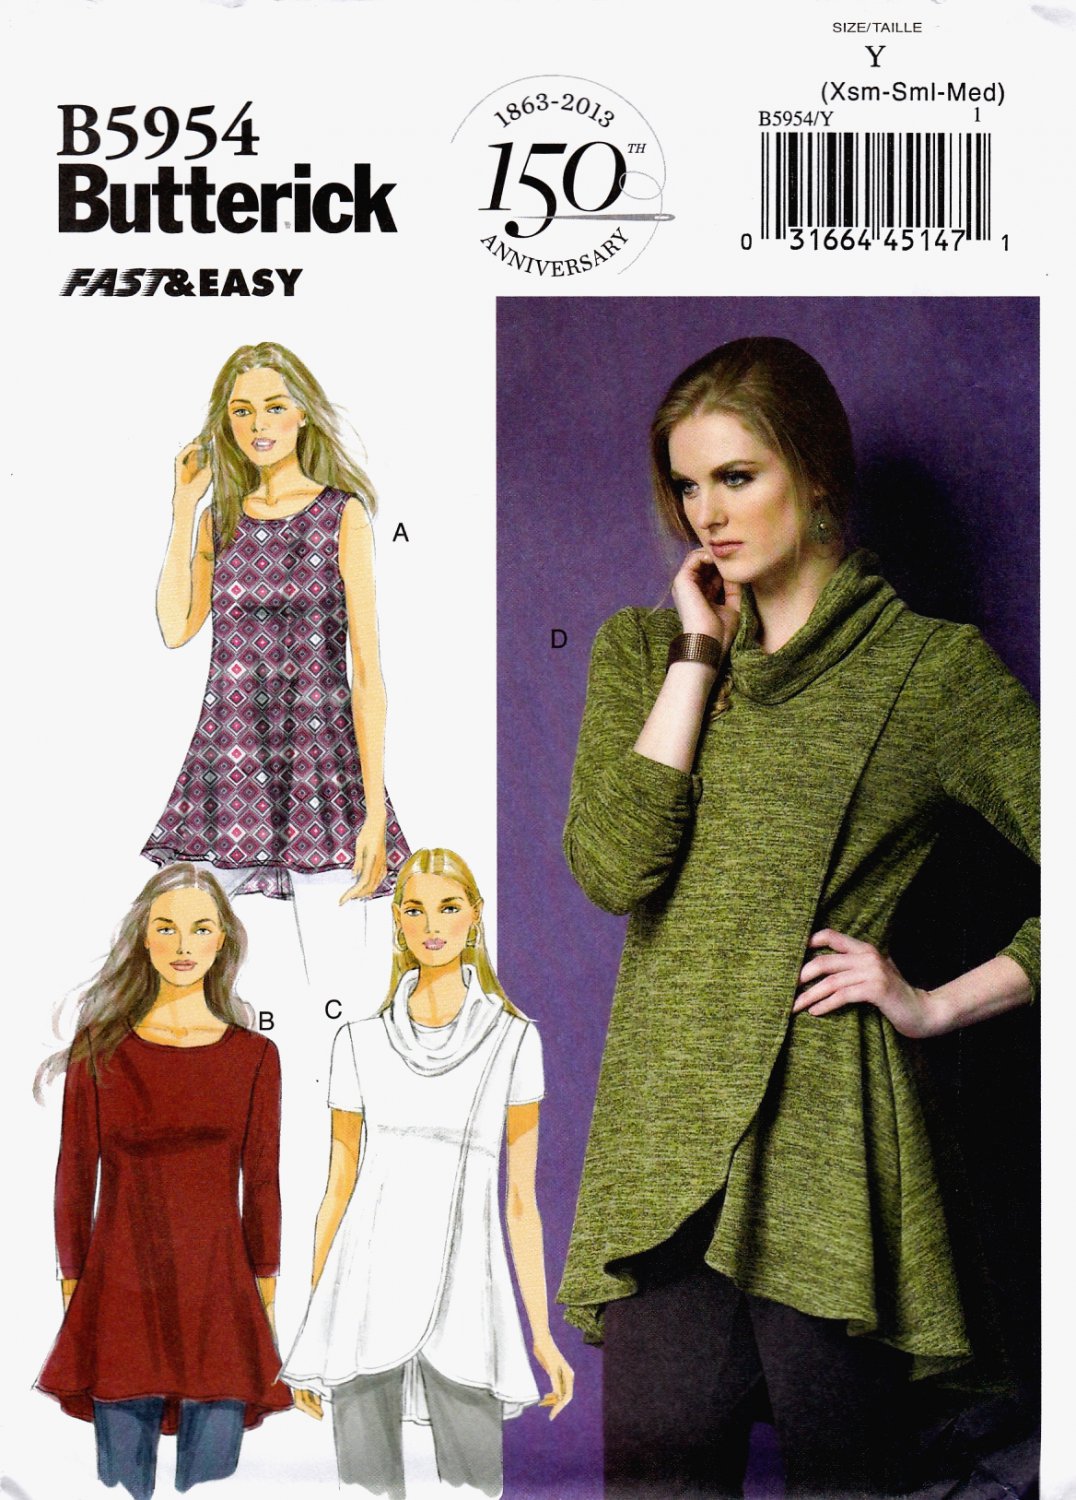 Butterick B5954 Misses Tunics Close Fitting Flared Sewing Pattern Sizes Xsm-Sml-Med